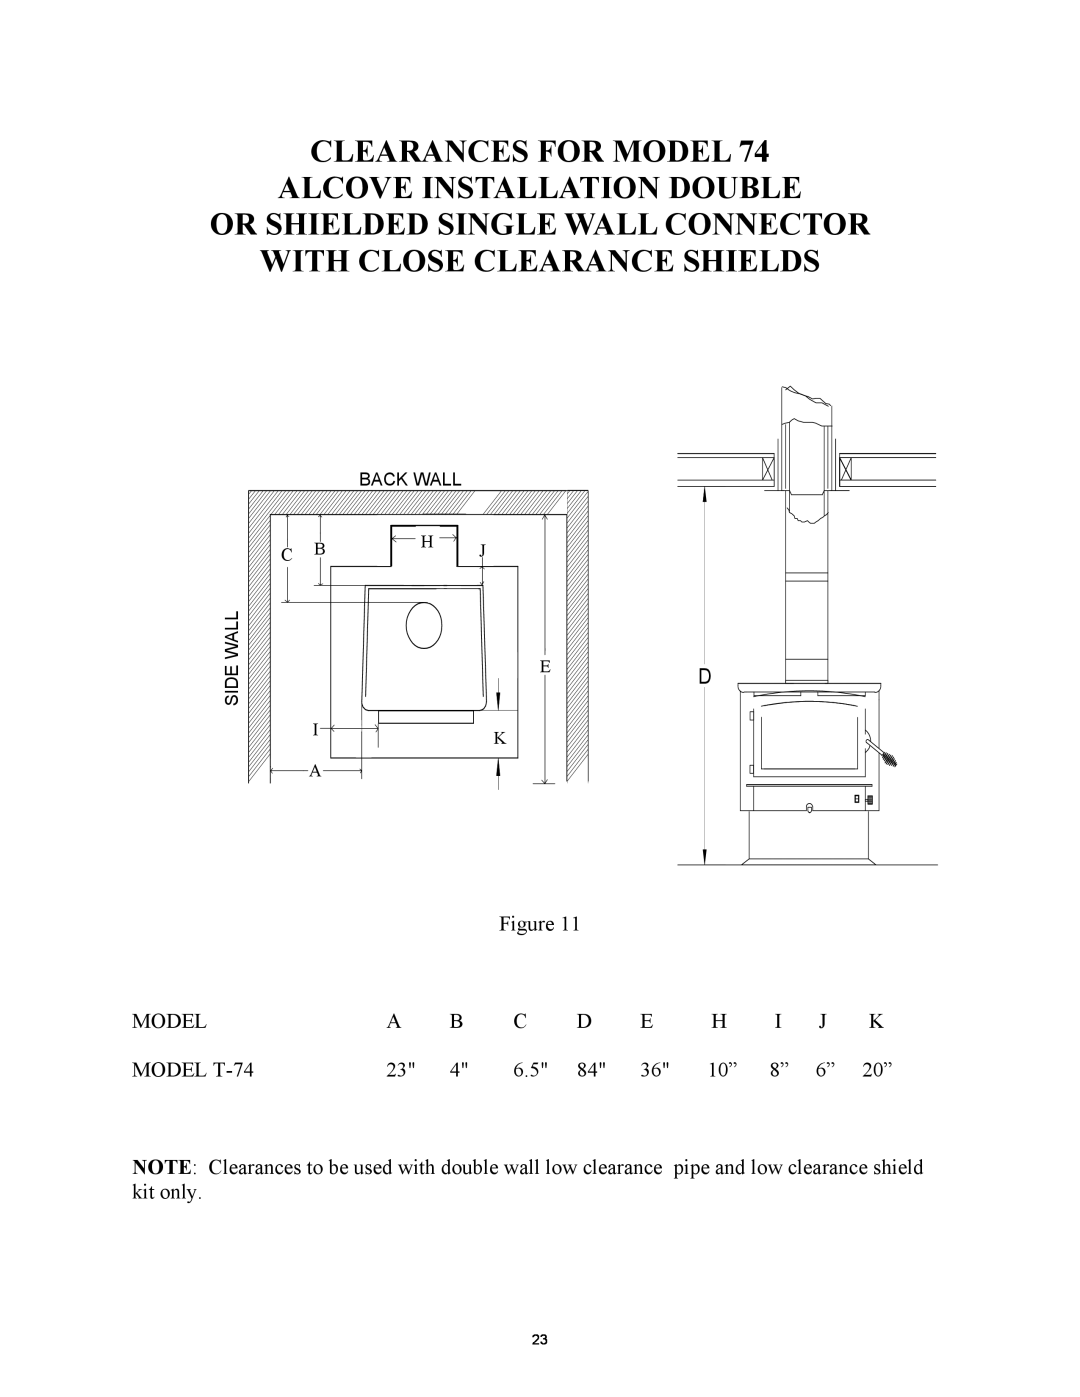 New Buck Corporation 74 Clearances For Model Alcove Installation Double, Or Shielded Single Wall Connector, B H C 